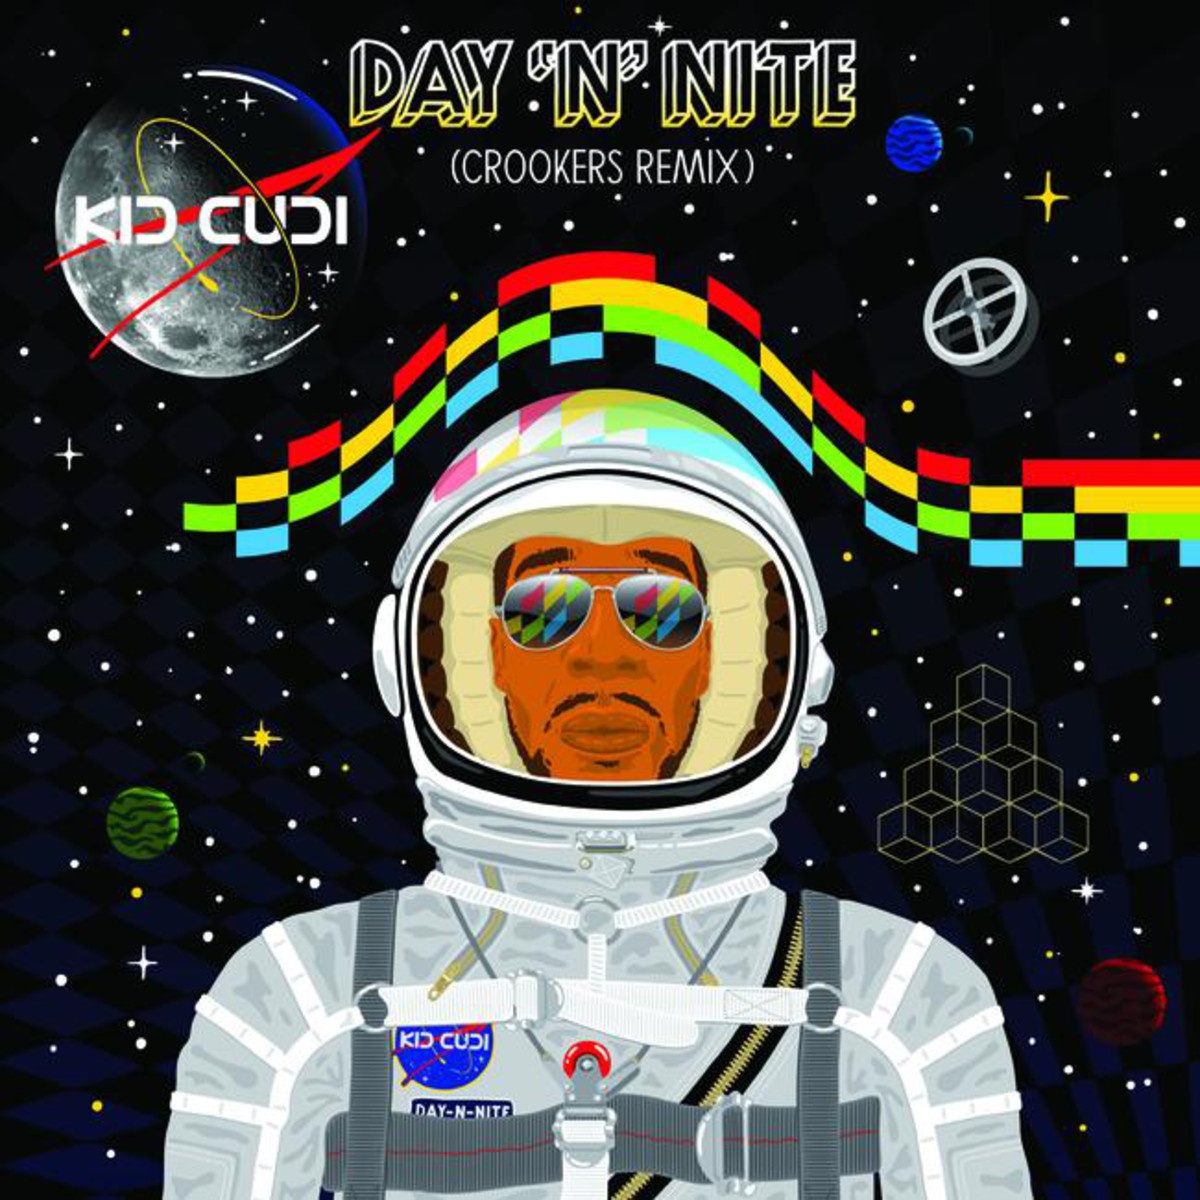 Day 'n' Nite (Crookers Remix)